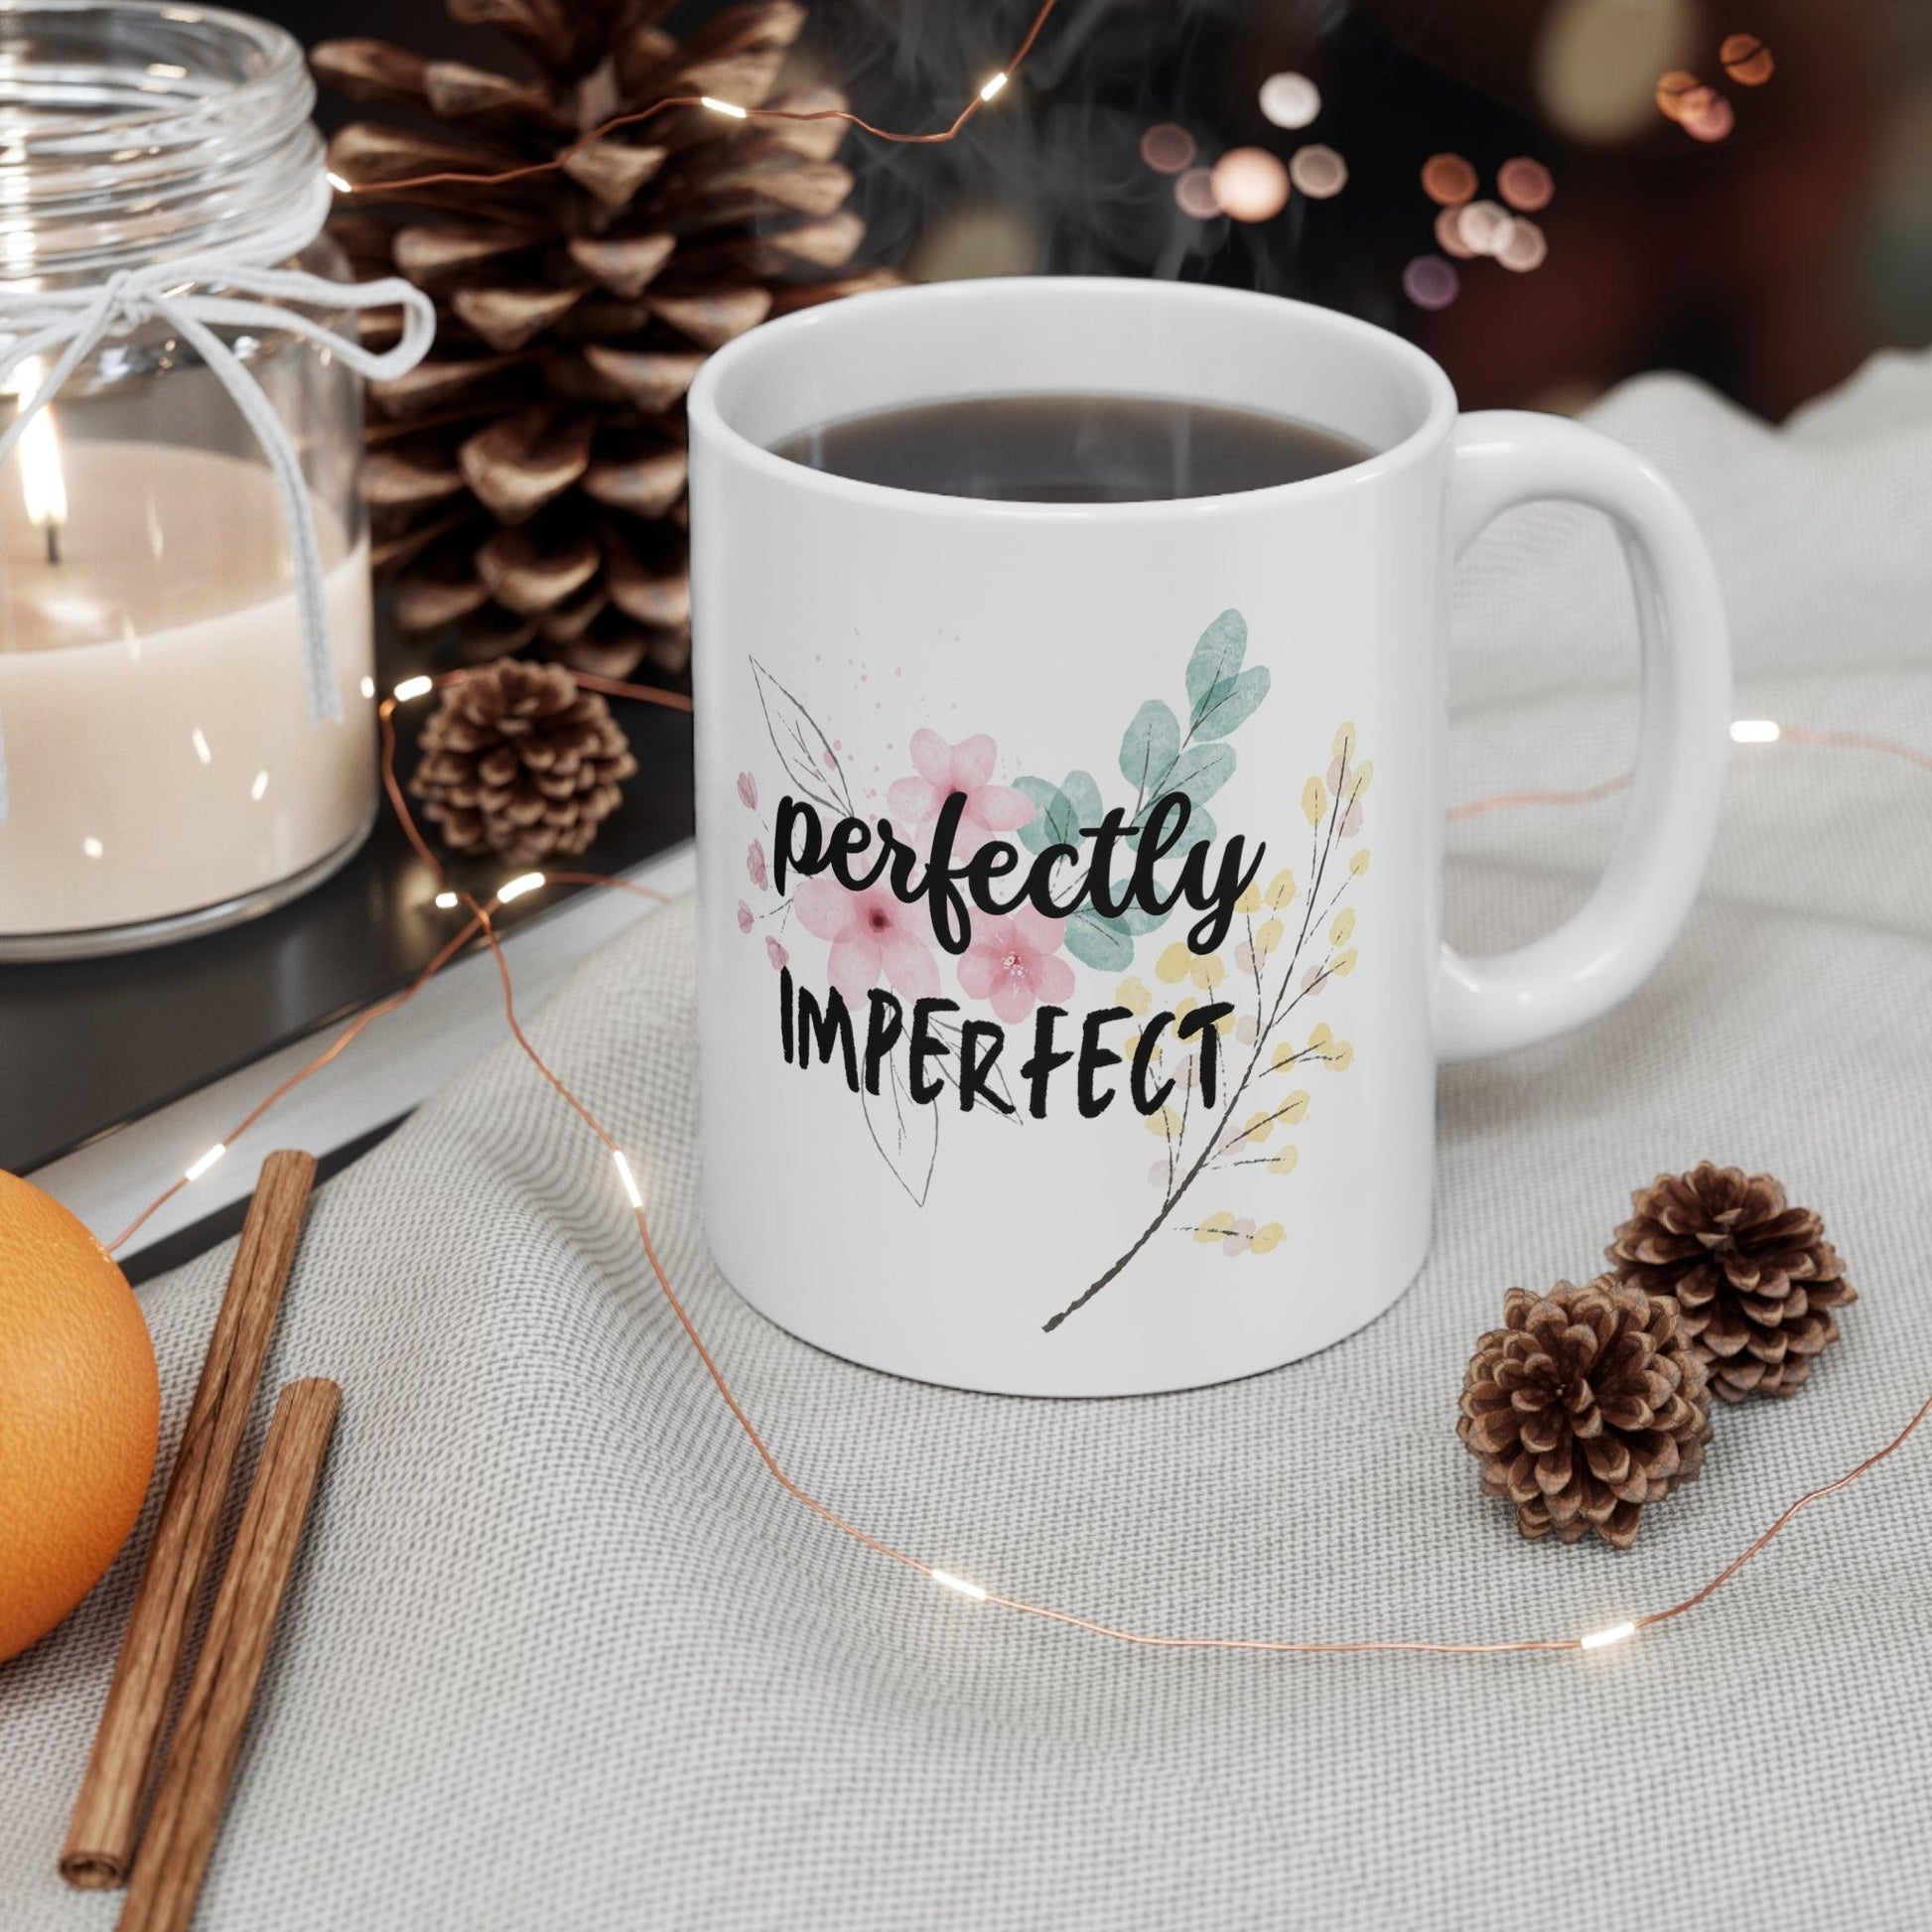 Neurodivergent Mental Health Mug - 'Perfectly Imperfect' Self Care Cup - Fidget and Focus